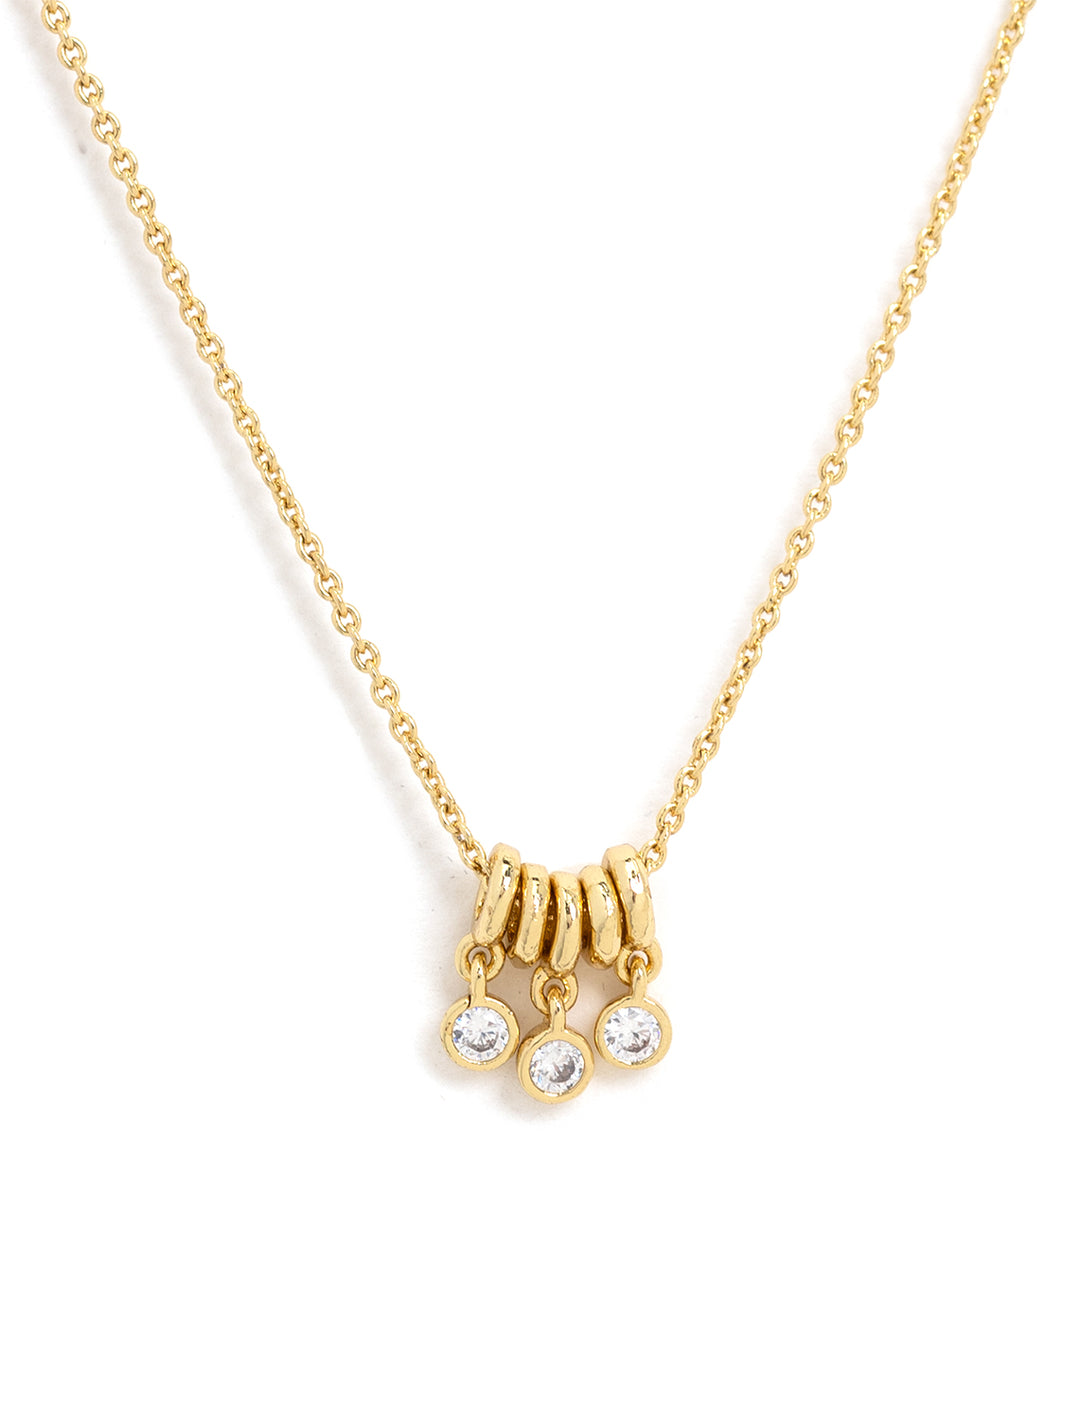 Front view of Tai's necklace with gold rings and cz dangles.